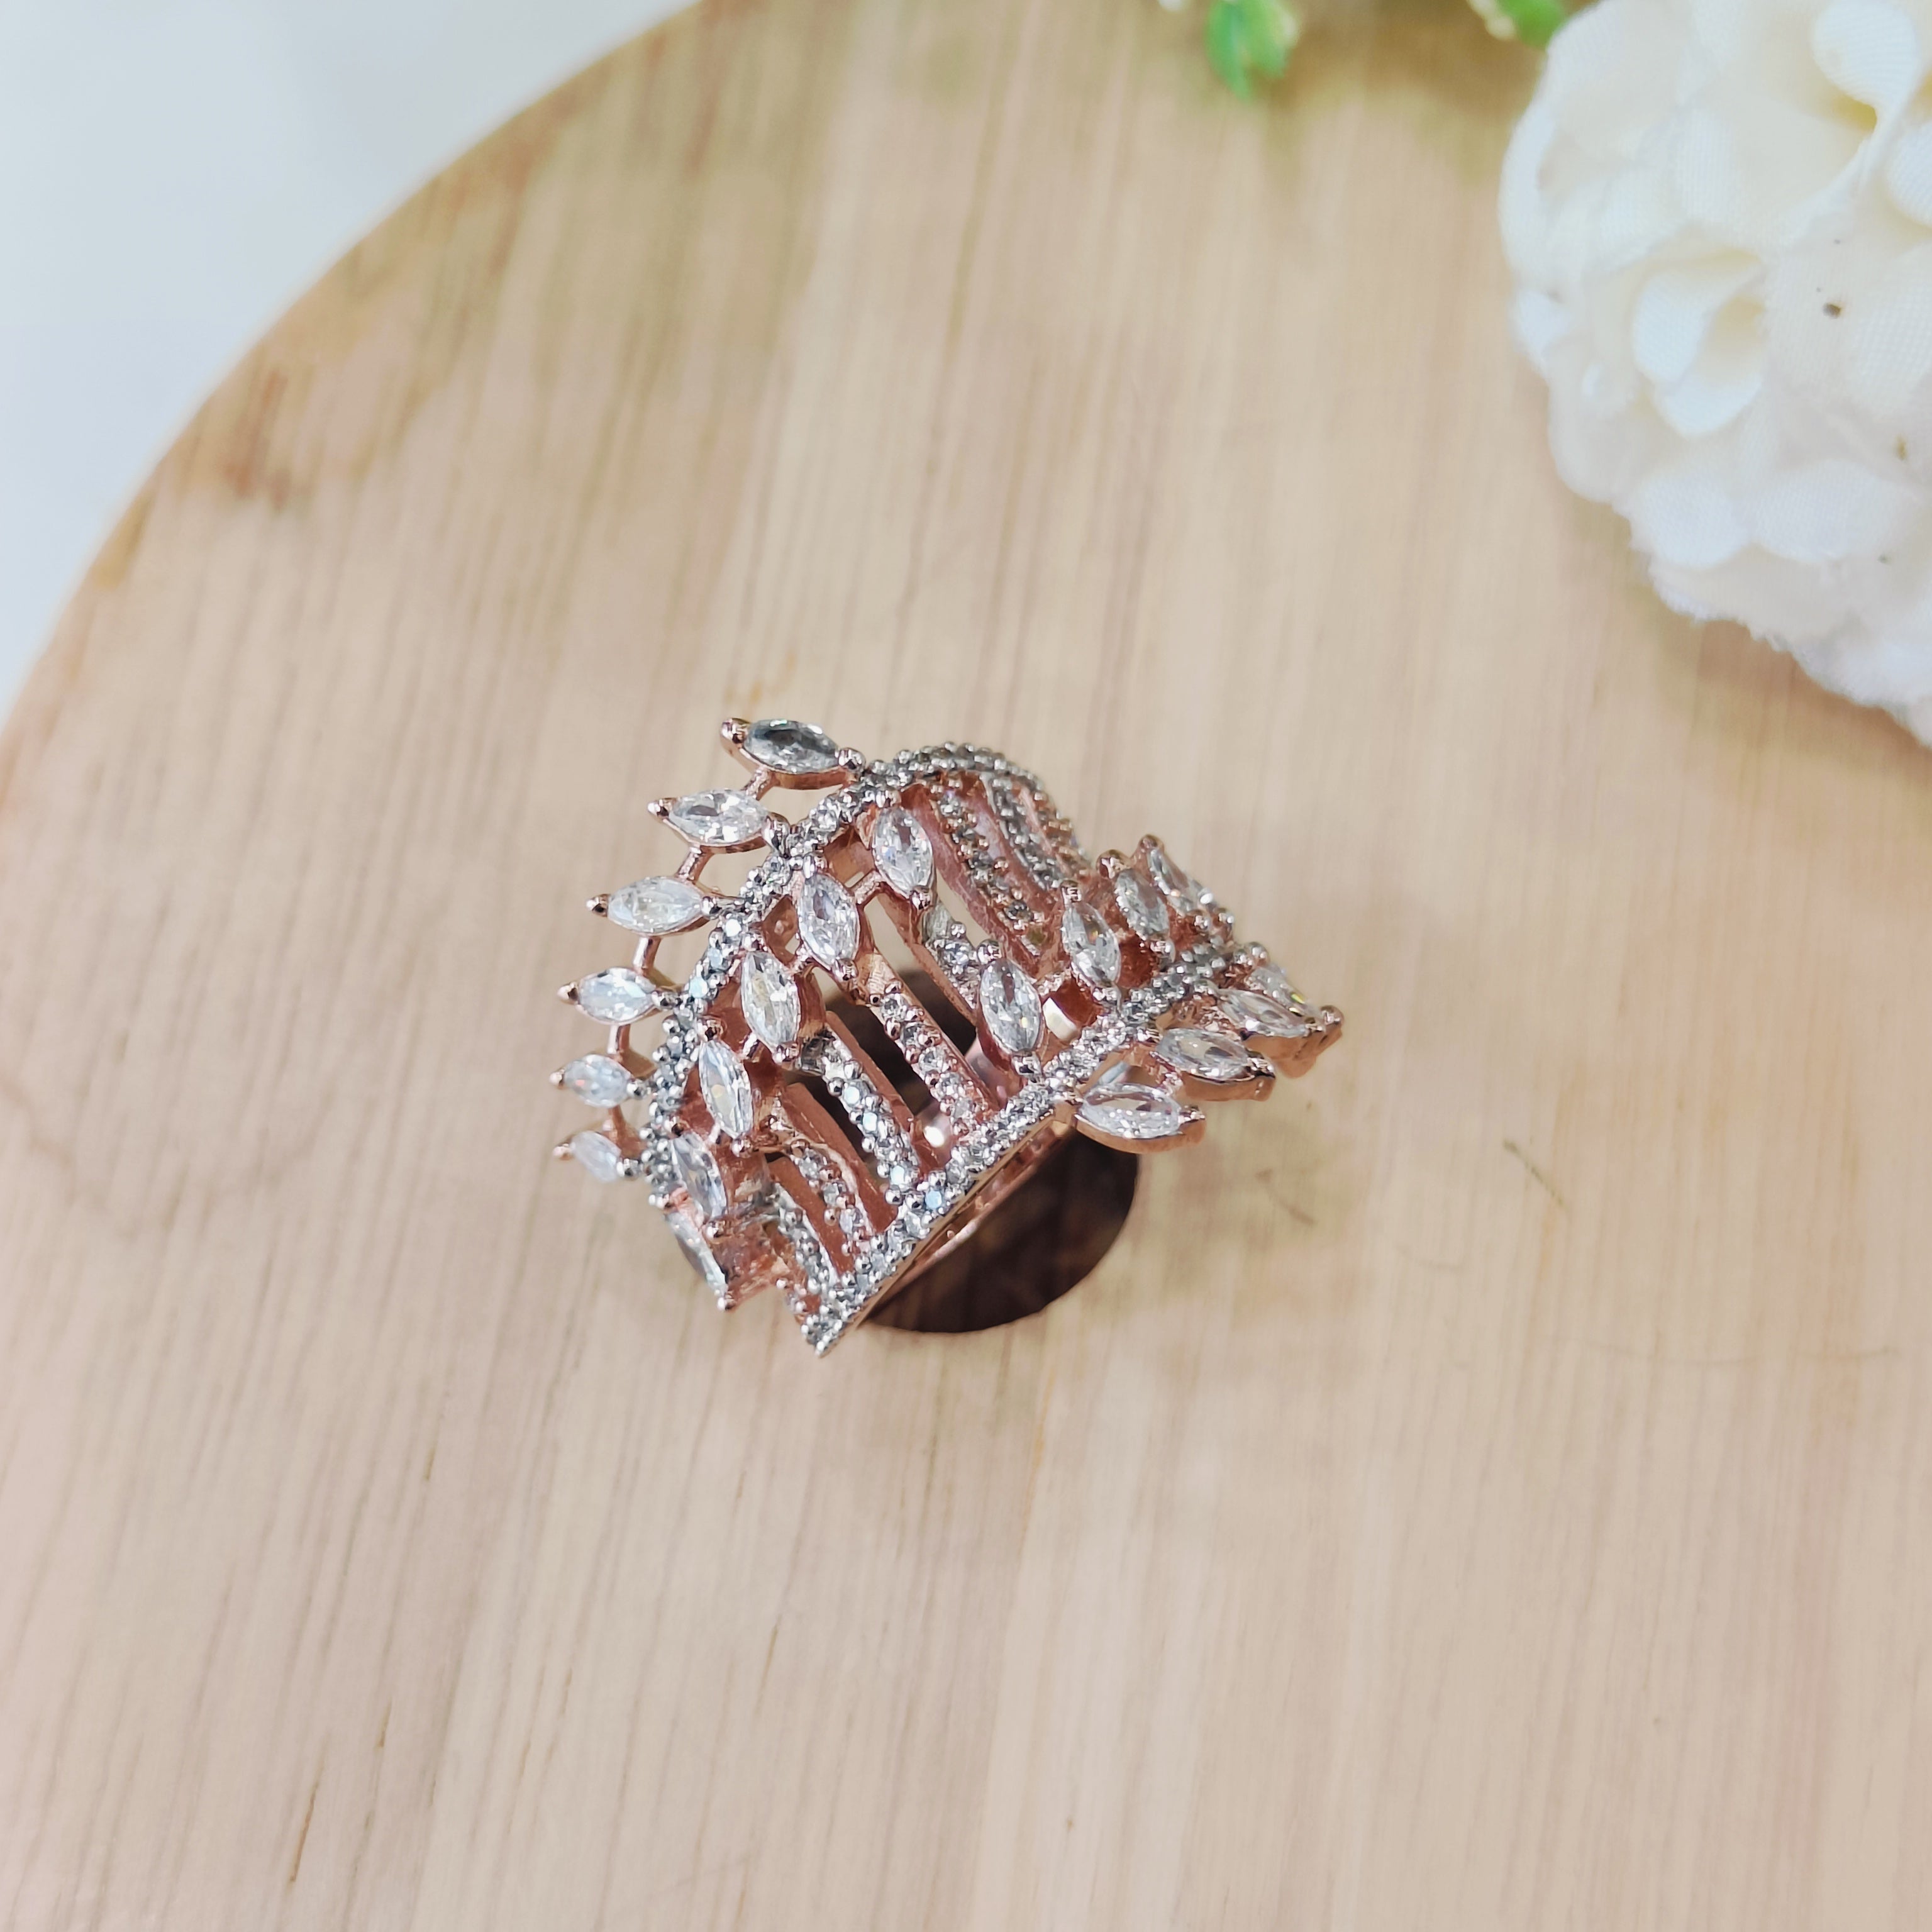 Vs sterling silver cocktail ring 179